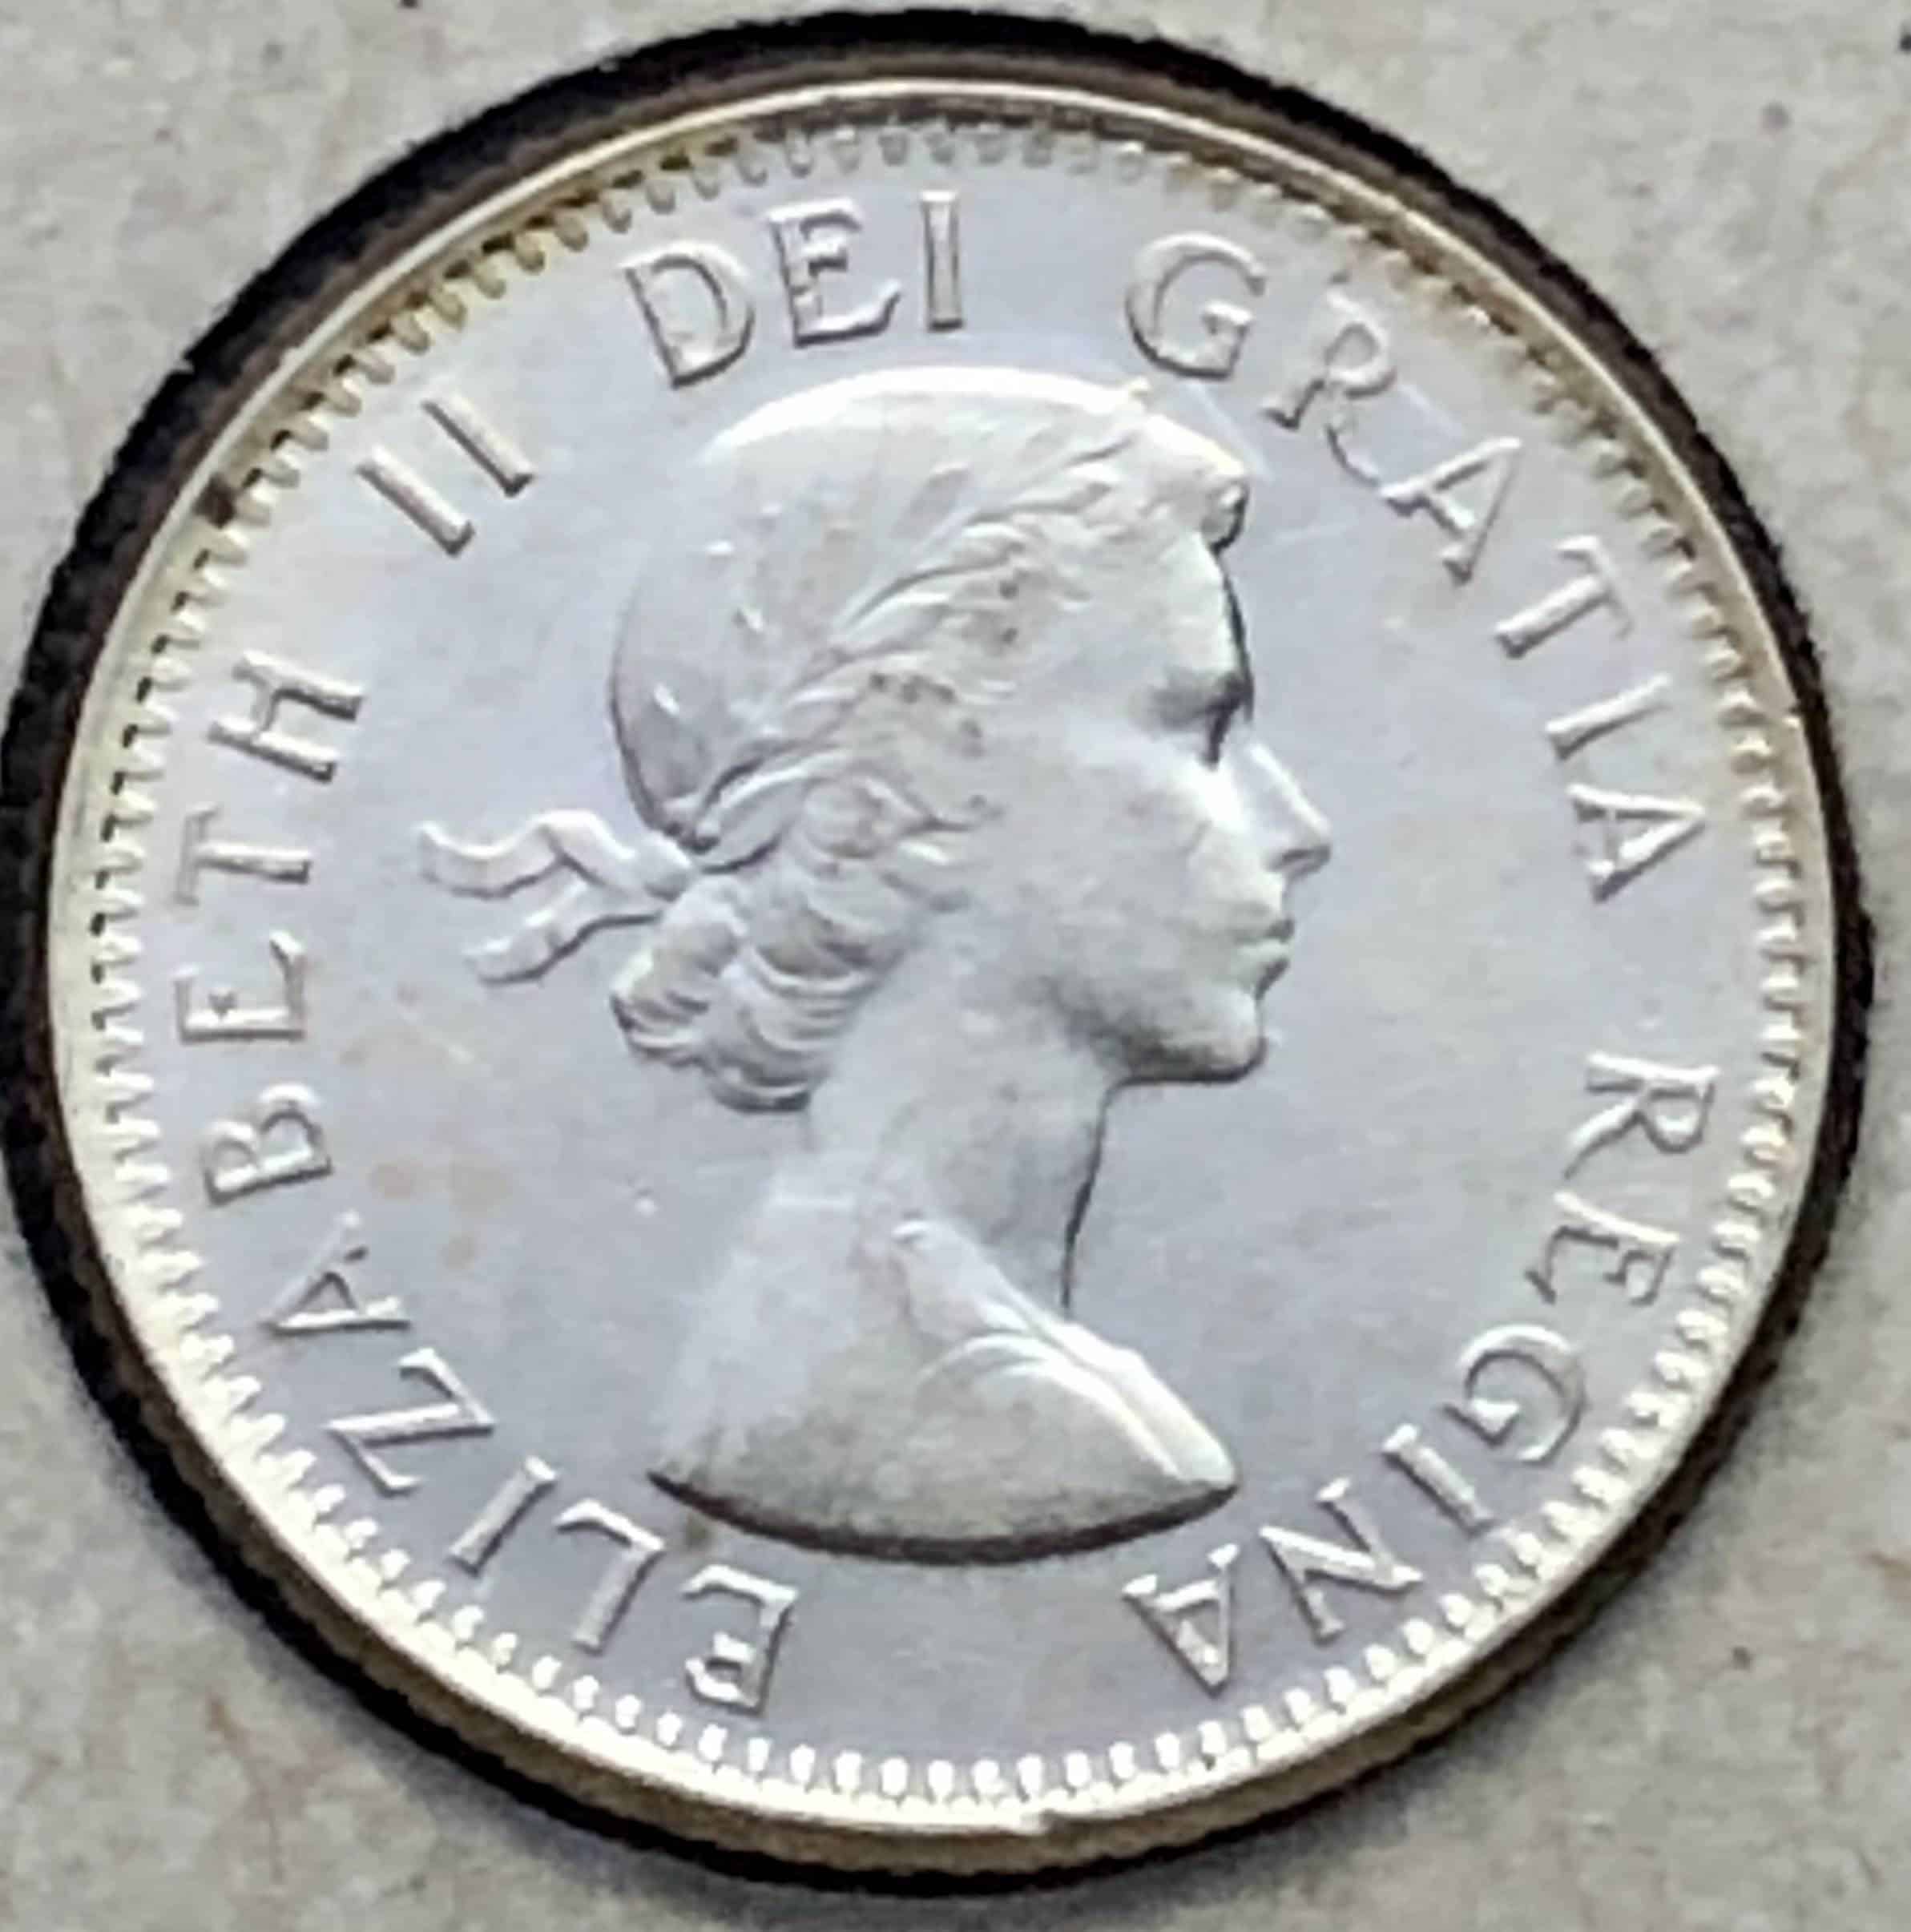 Canada - 10 Cents